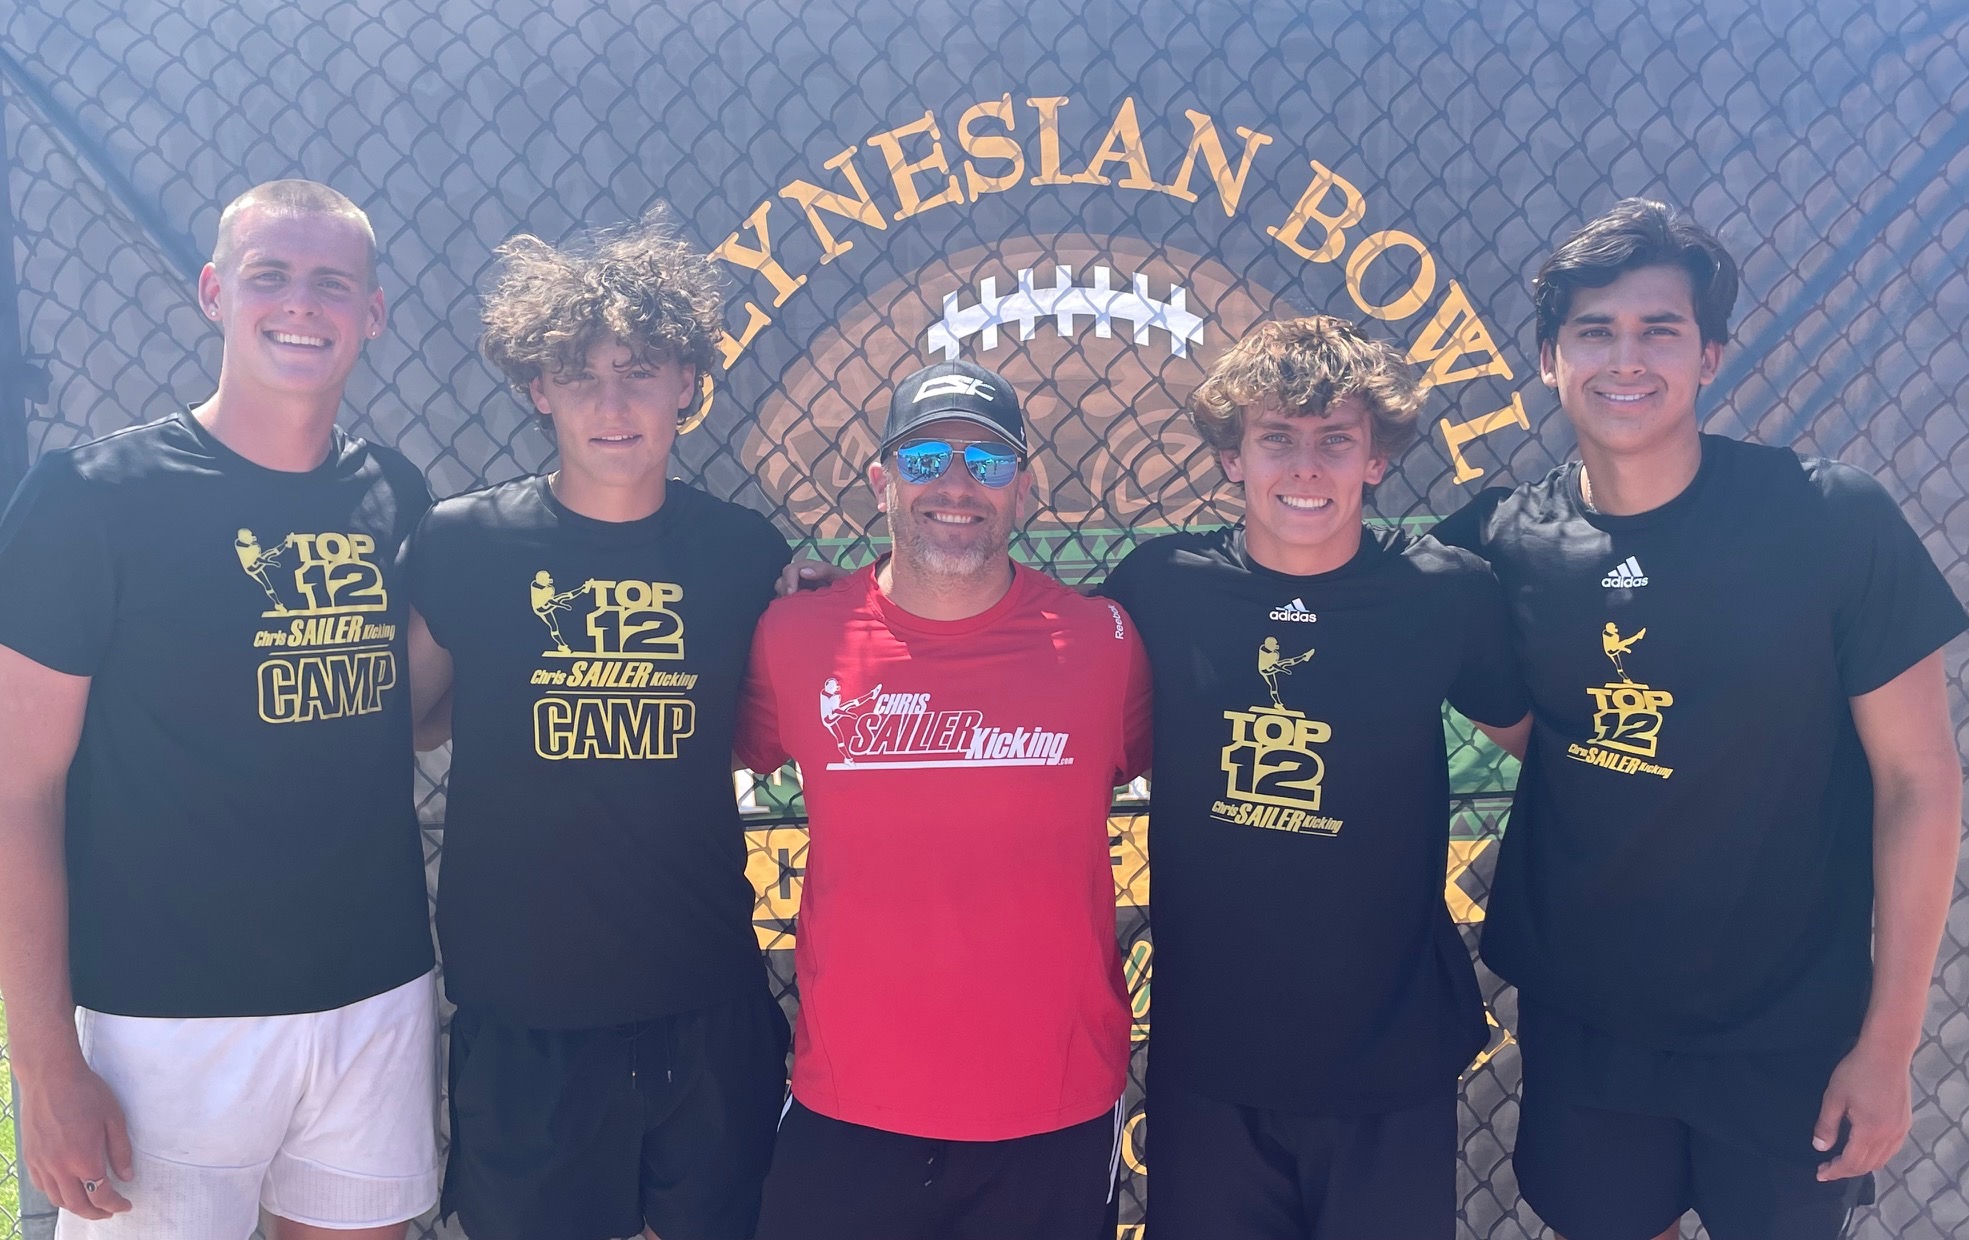 Chris Sailer Kicking Voted best kicking and punting camp in the world.